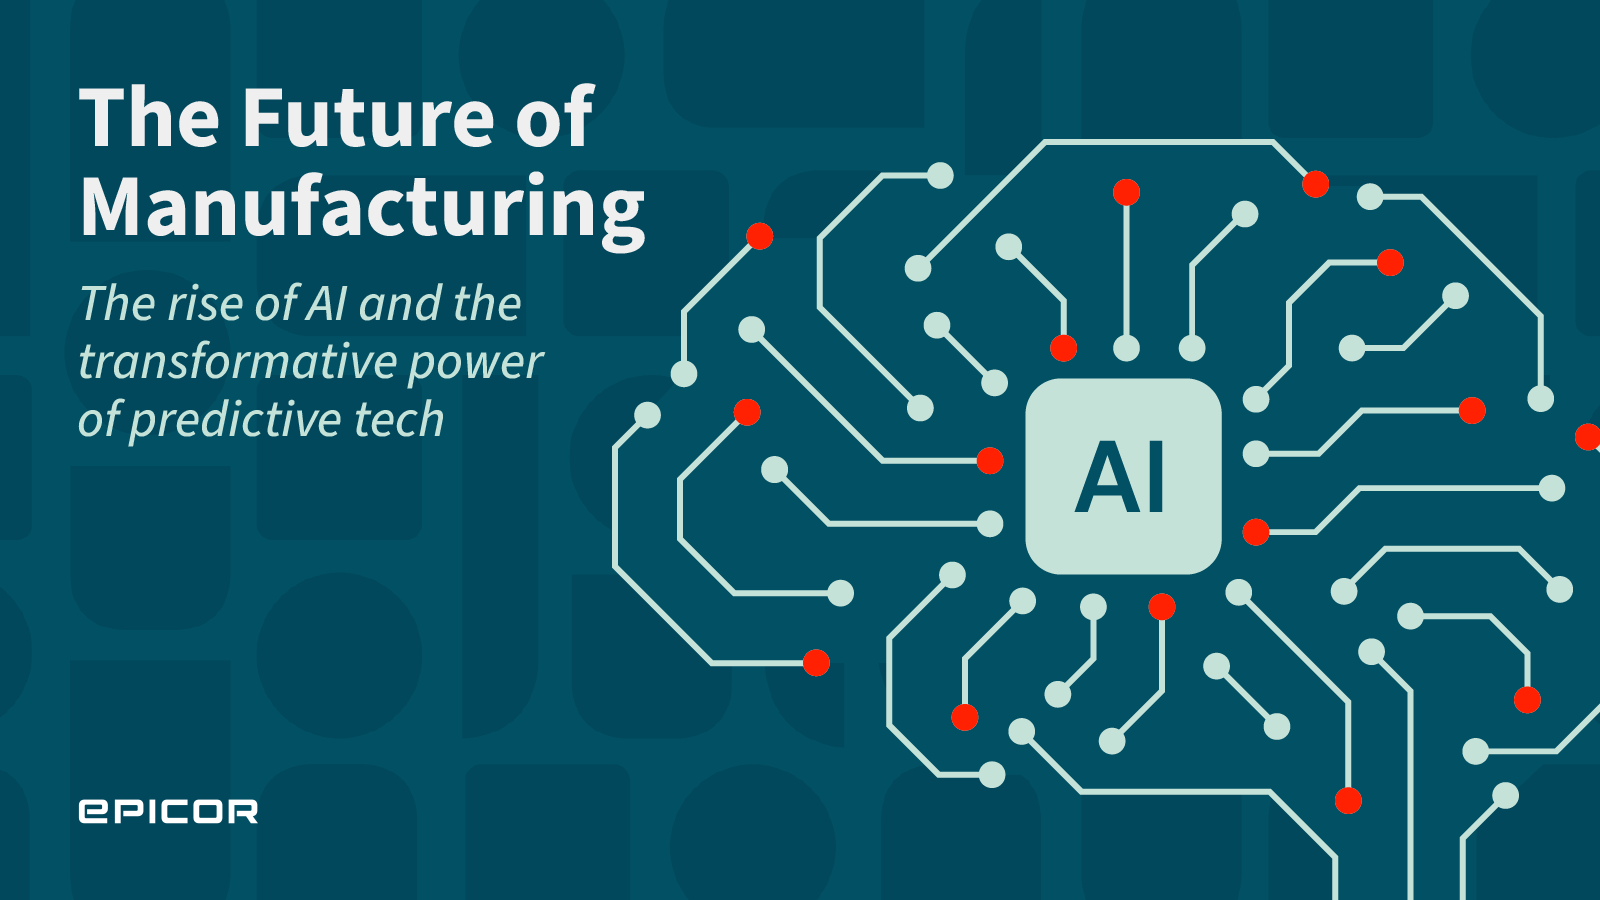 The Future of Manufacturing - The rise of AI and the transformative power of predictive tech